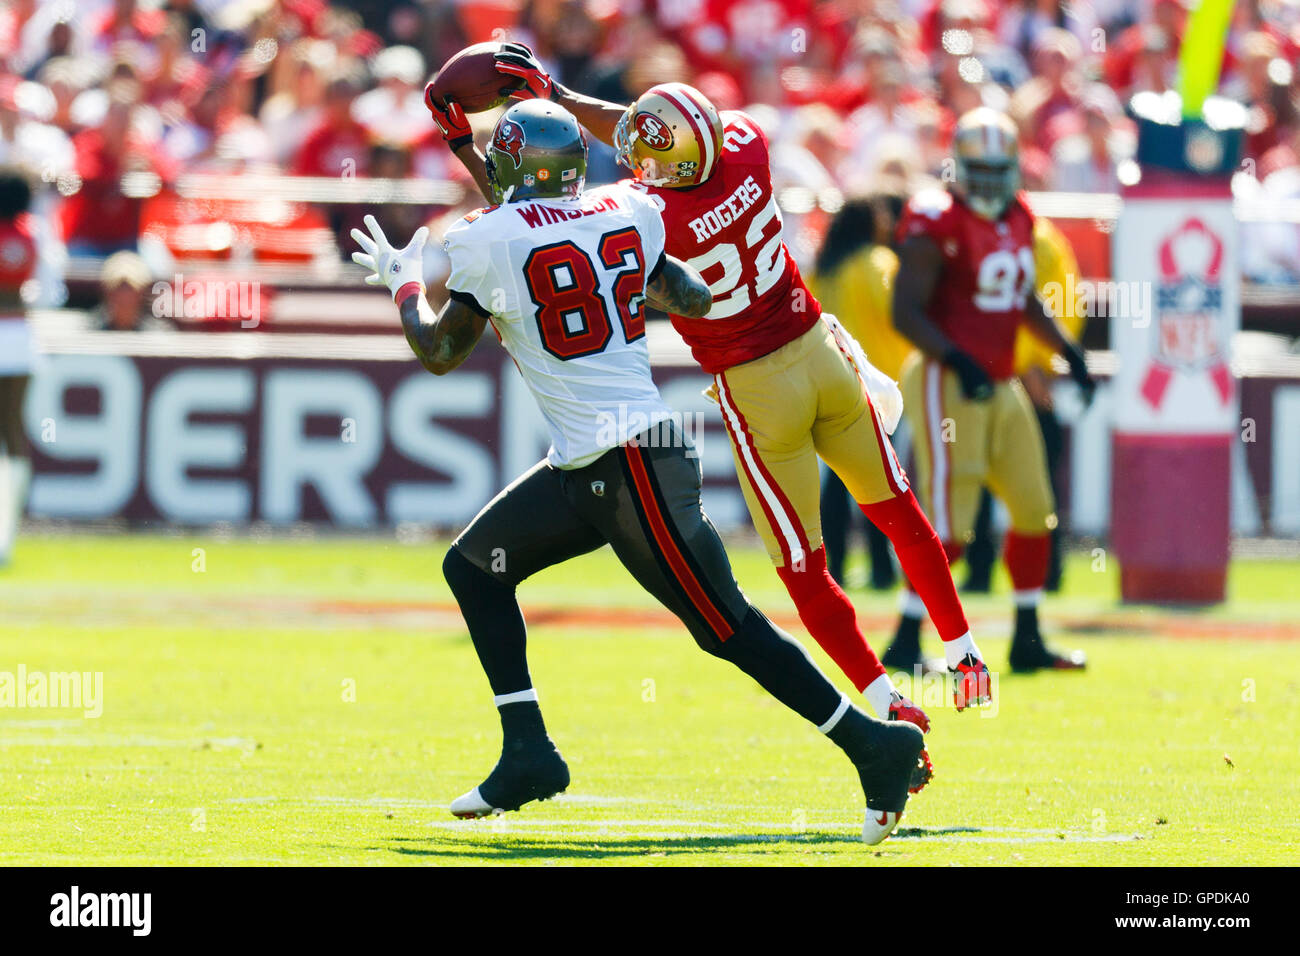 Oct 9, 2011; San Francisco, CA, USA; San Francisco 49ers cornerback Carlos Rogers (22) intercepts a pass intended for Tampa Bay Buccaneers tight end Kellen Winslow (82) during the second quarter at Candlestick Park. Rogers returned the interception for a Stock Photo